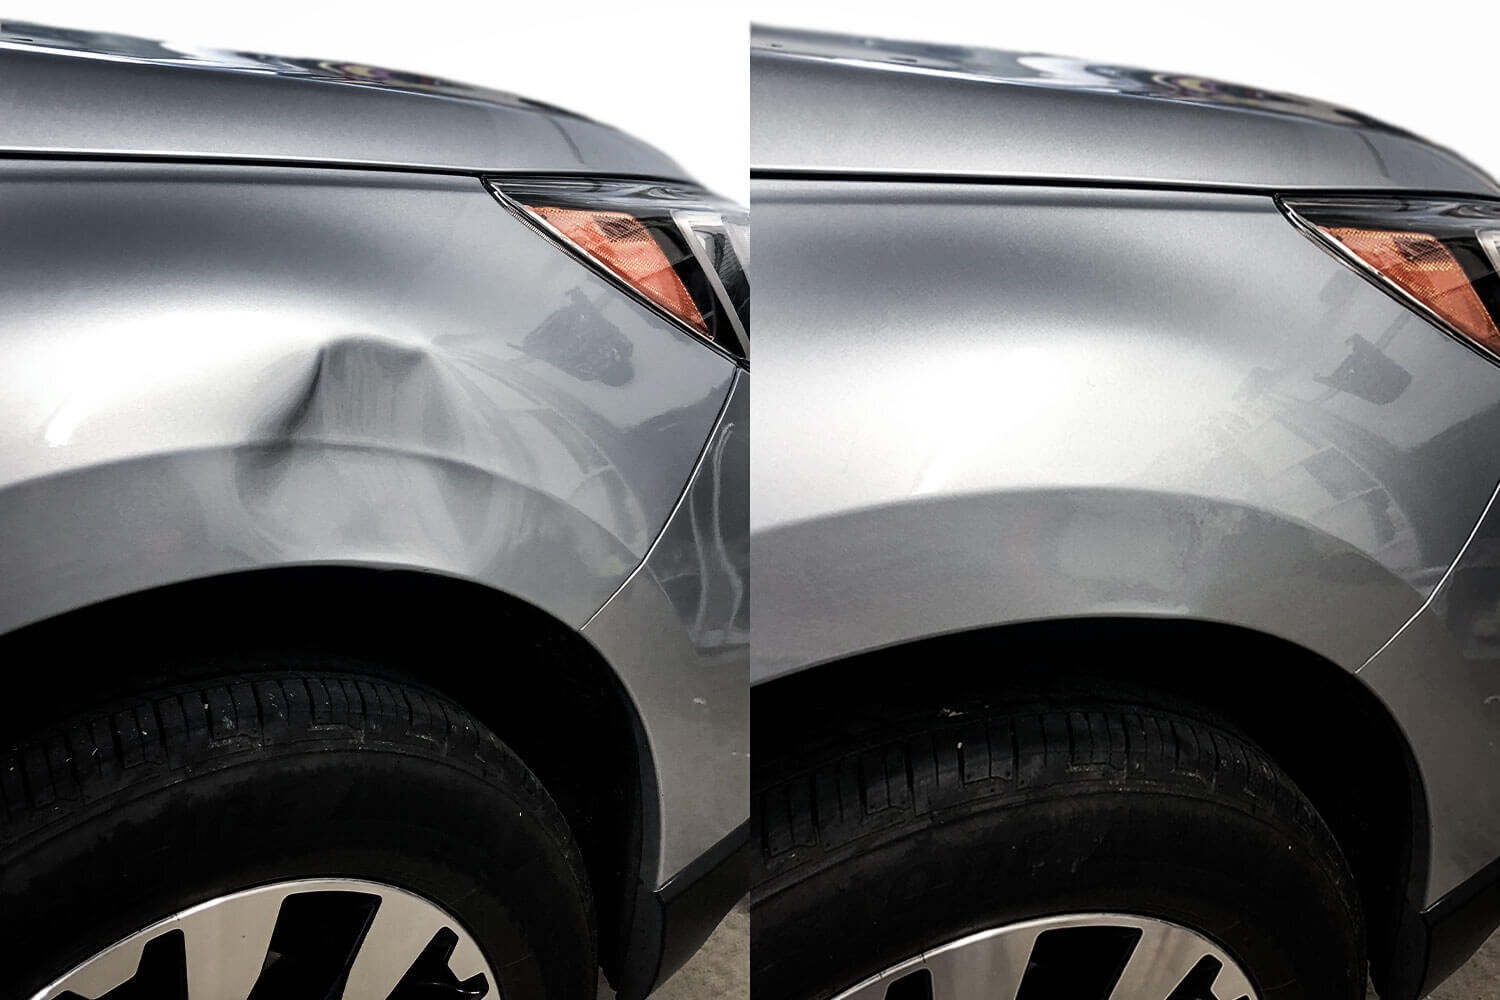  Learn More About Auto Dent Removal thumbnail